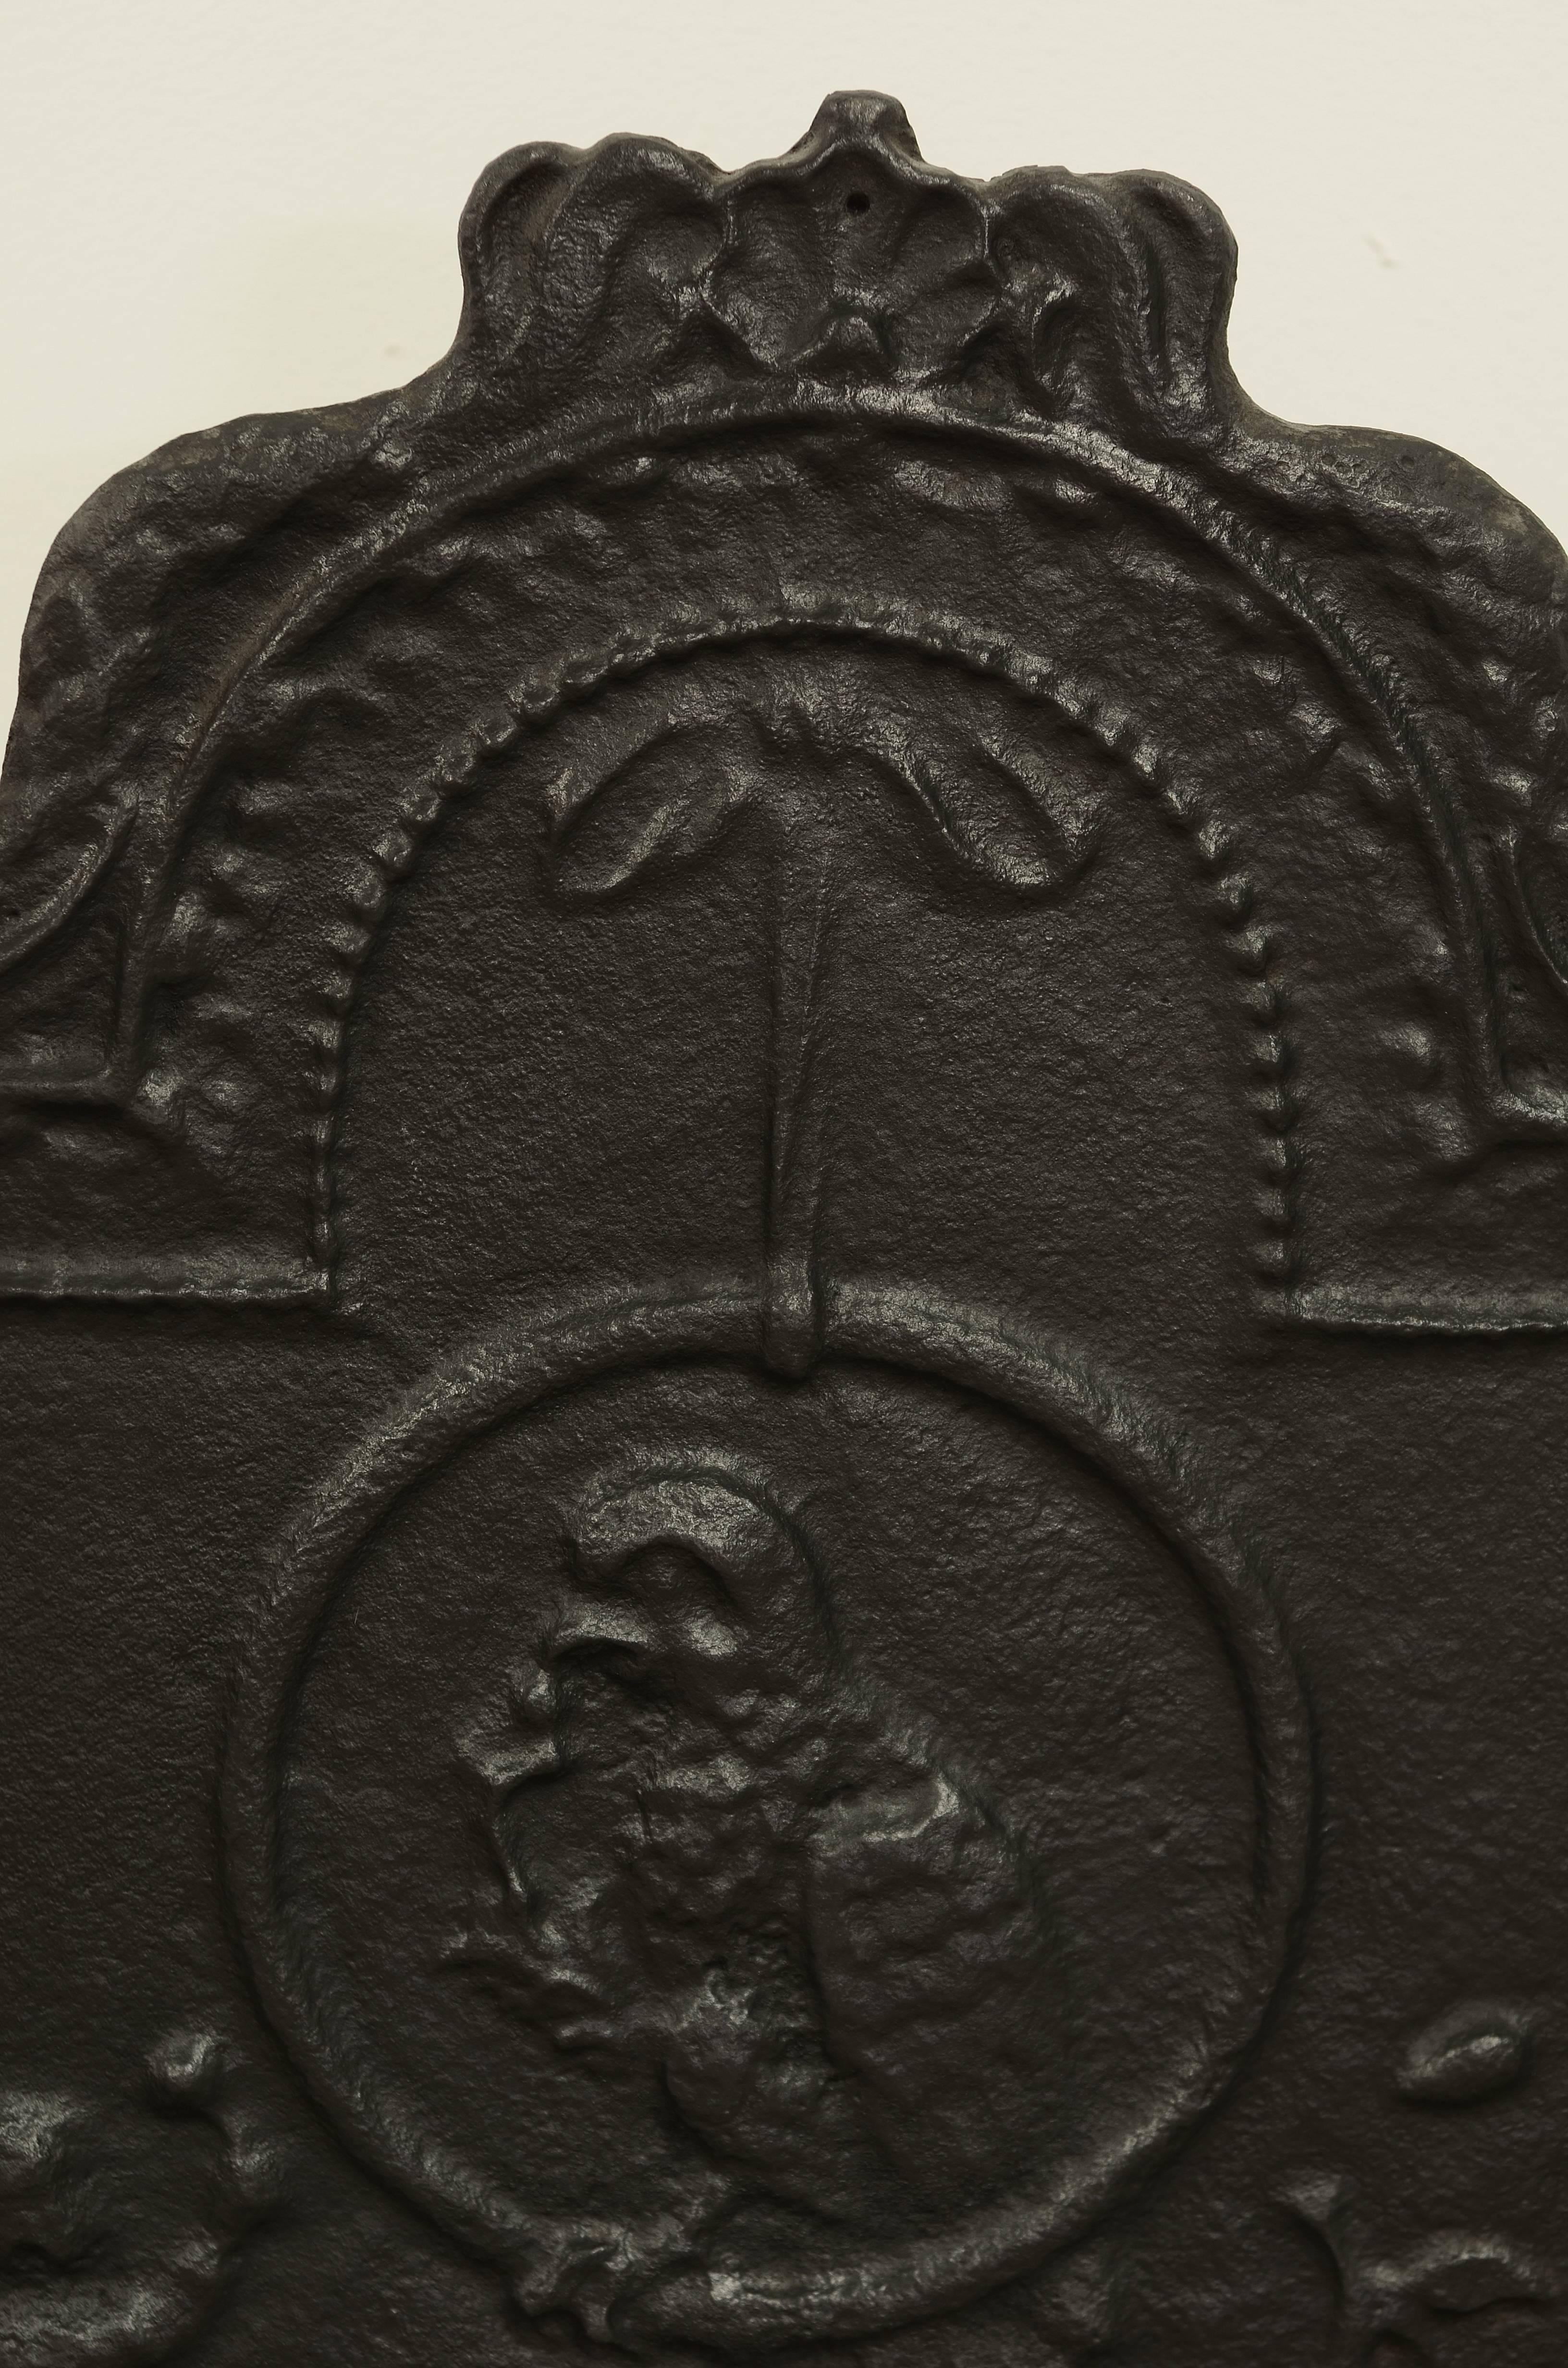 Lovely decorative antique cast iron fireback showing a parrot sitting in a ring.

Excellent condition, can be used in an real fireplace or as a very decorative backsplash.
Can be supplied with stand.